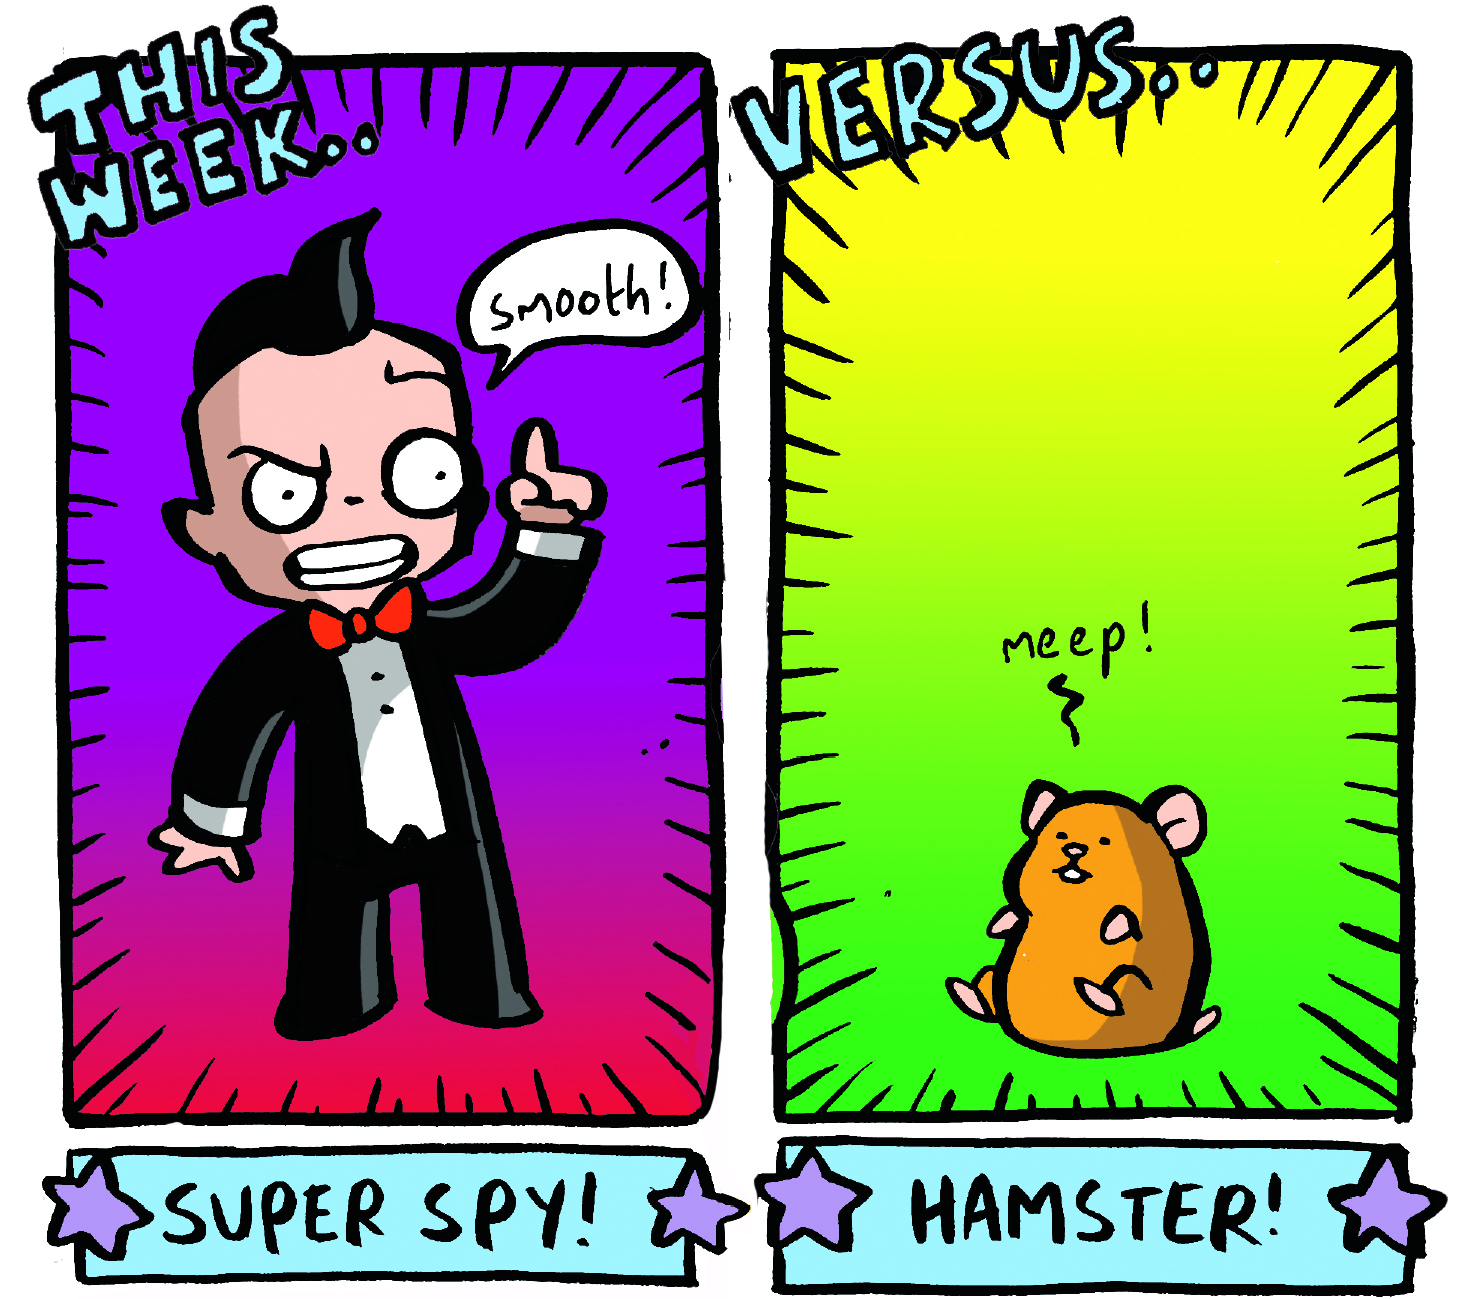 Arena of Awesome - Spy vs Hamster